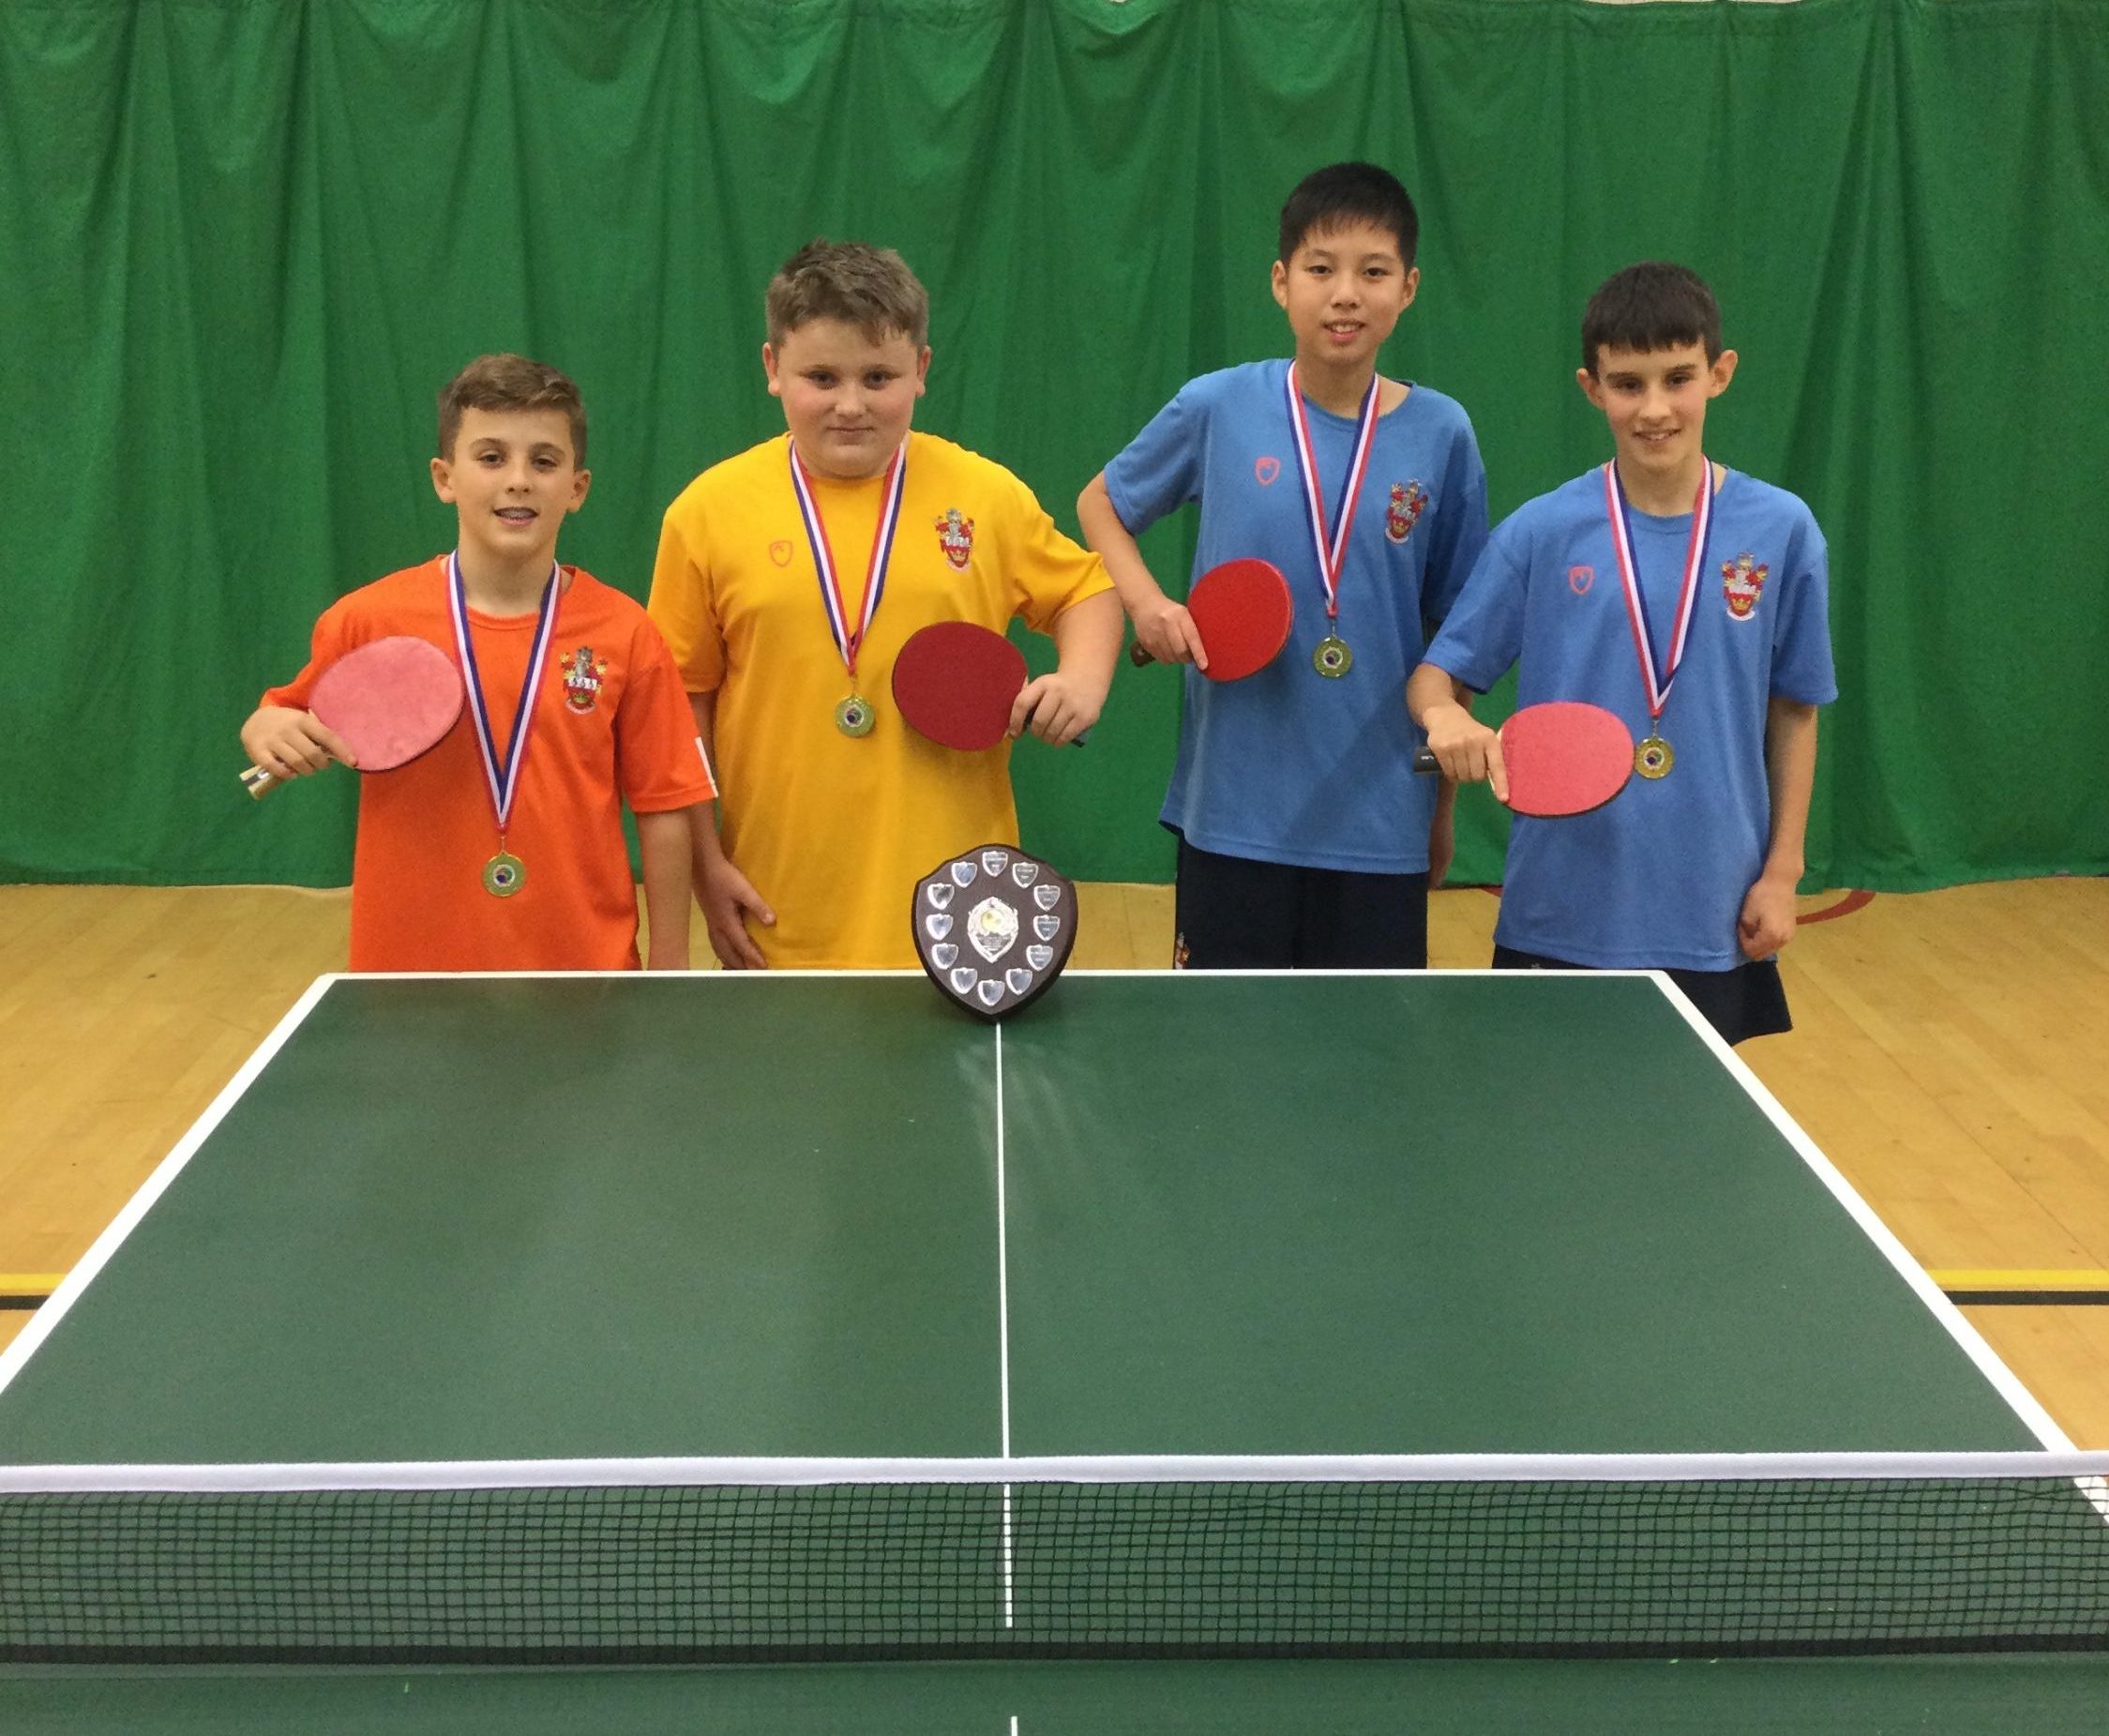 RGS Under 13 Table Tennis team qualify for Regional Finals